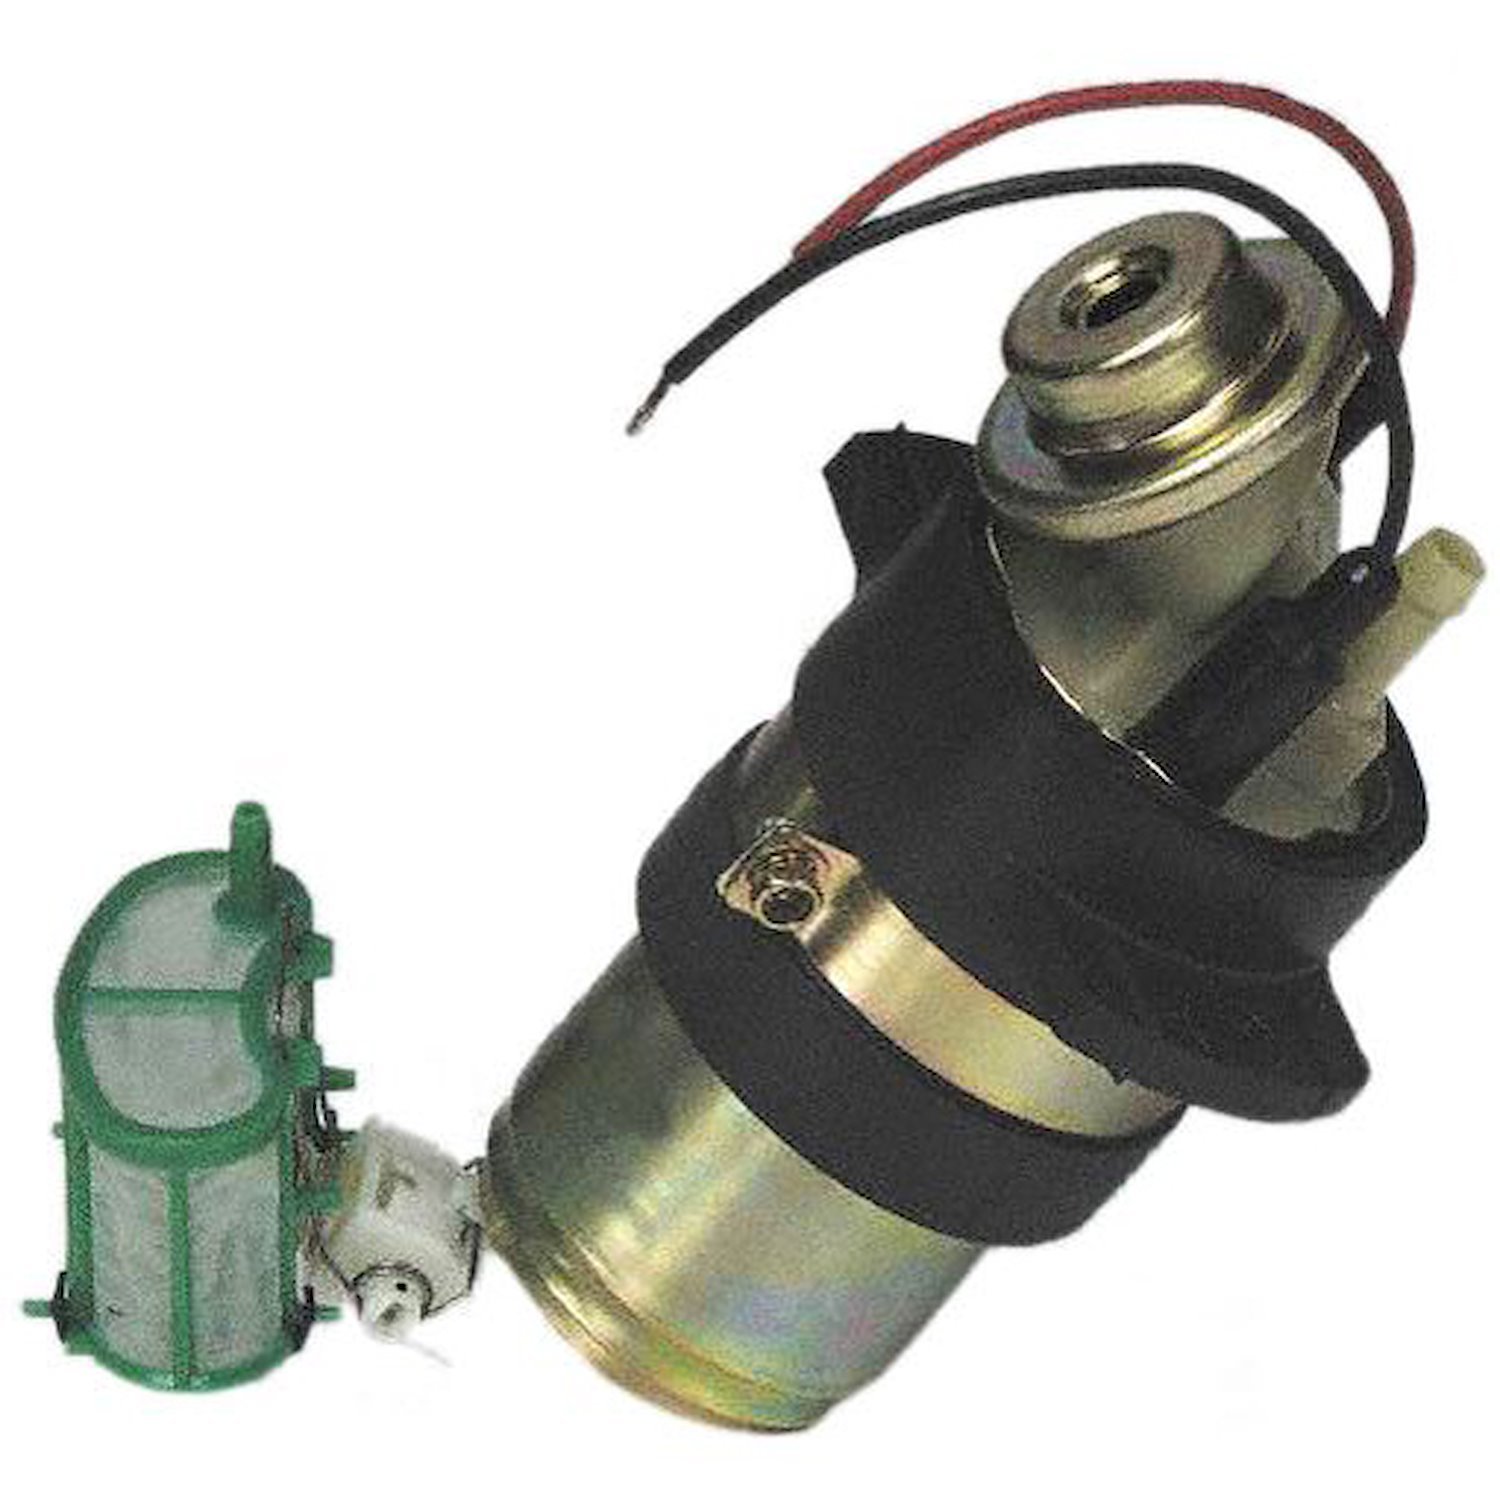 EFI In-Tank Electric Fuel Pump And Strainer Set for 1990-1996 for Infiniti Q45